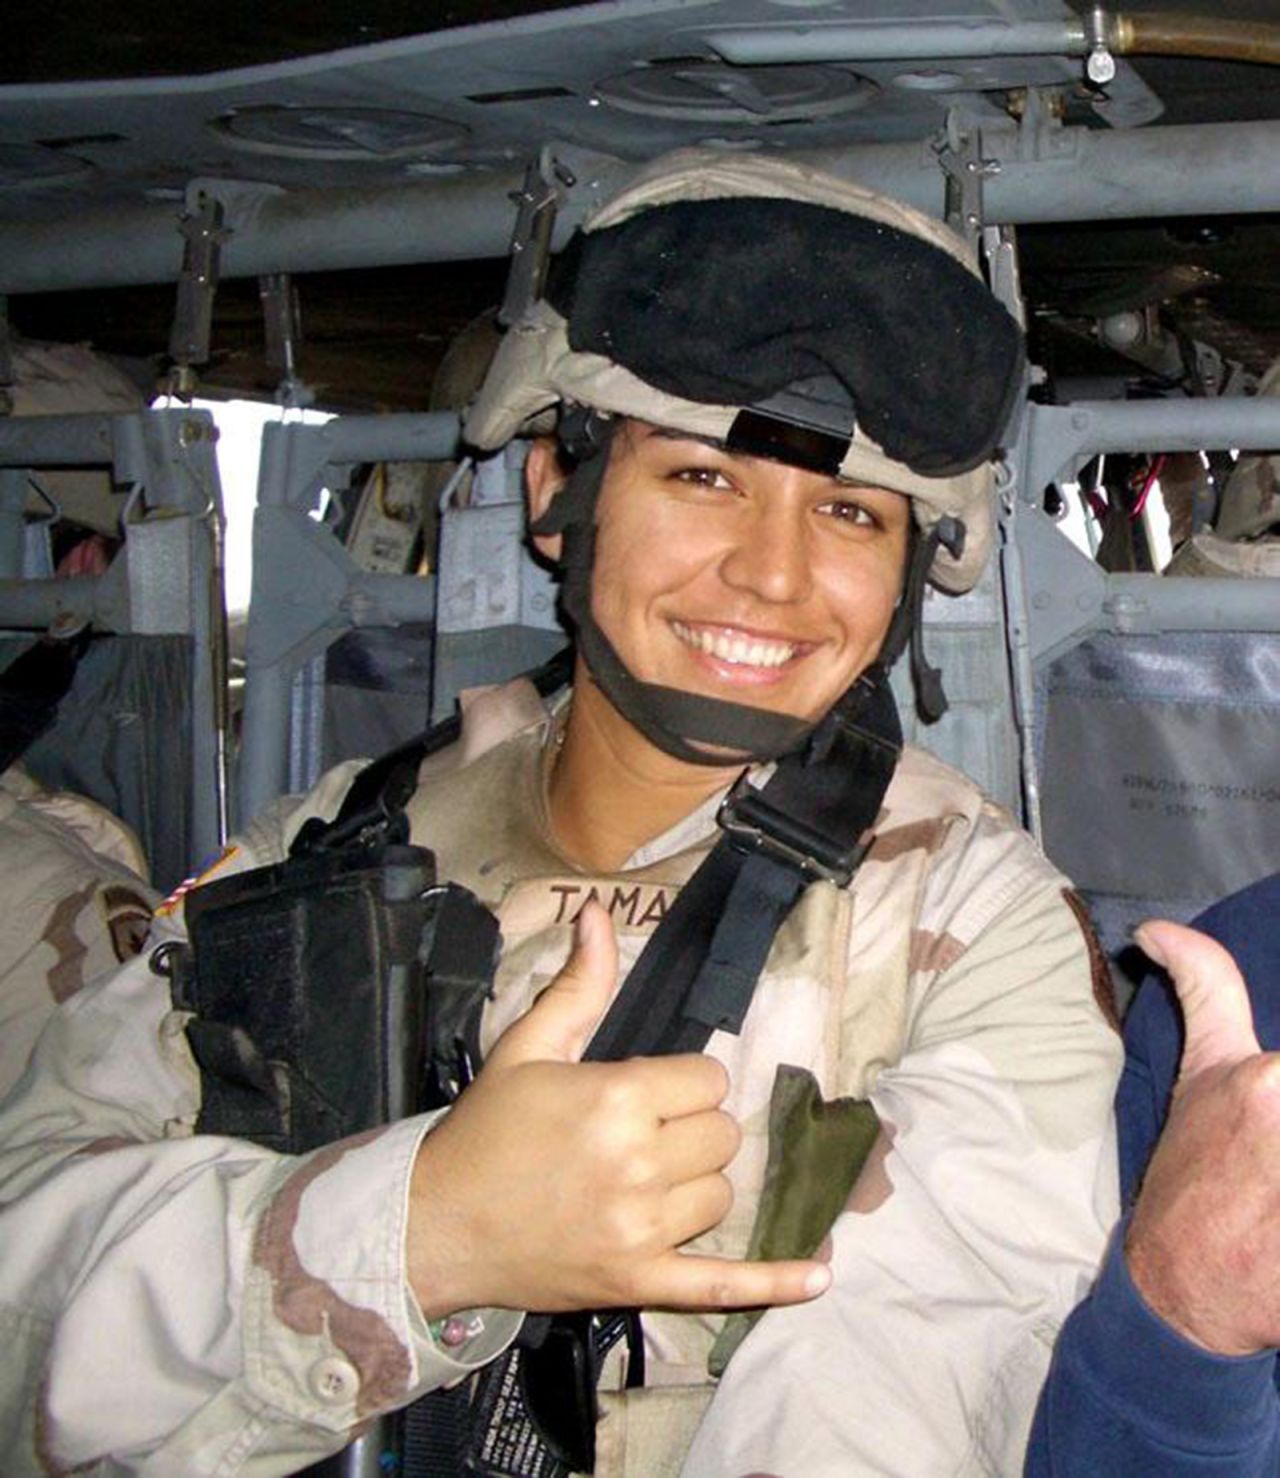 Gabbard enlisted in the Hawaii Army National Guard in 2003, completing her basic training between legislative sessions. The next year, her unit was activated and she served with a field medical unit in Iraq.